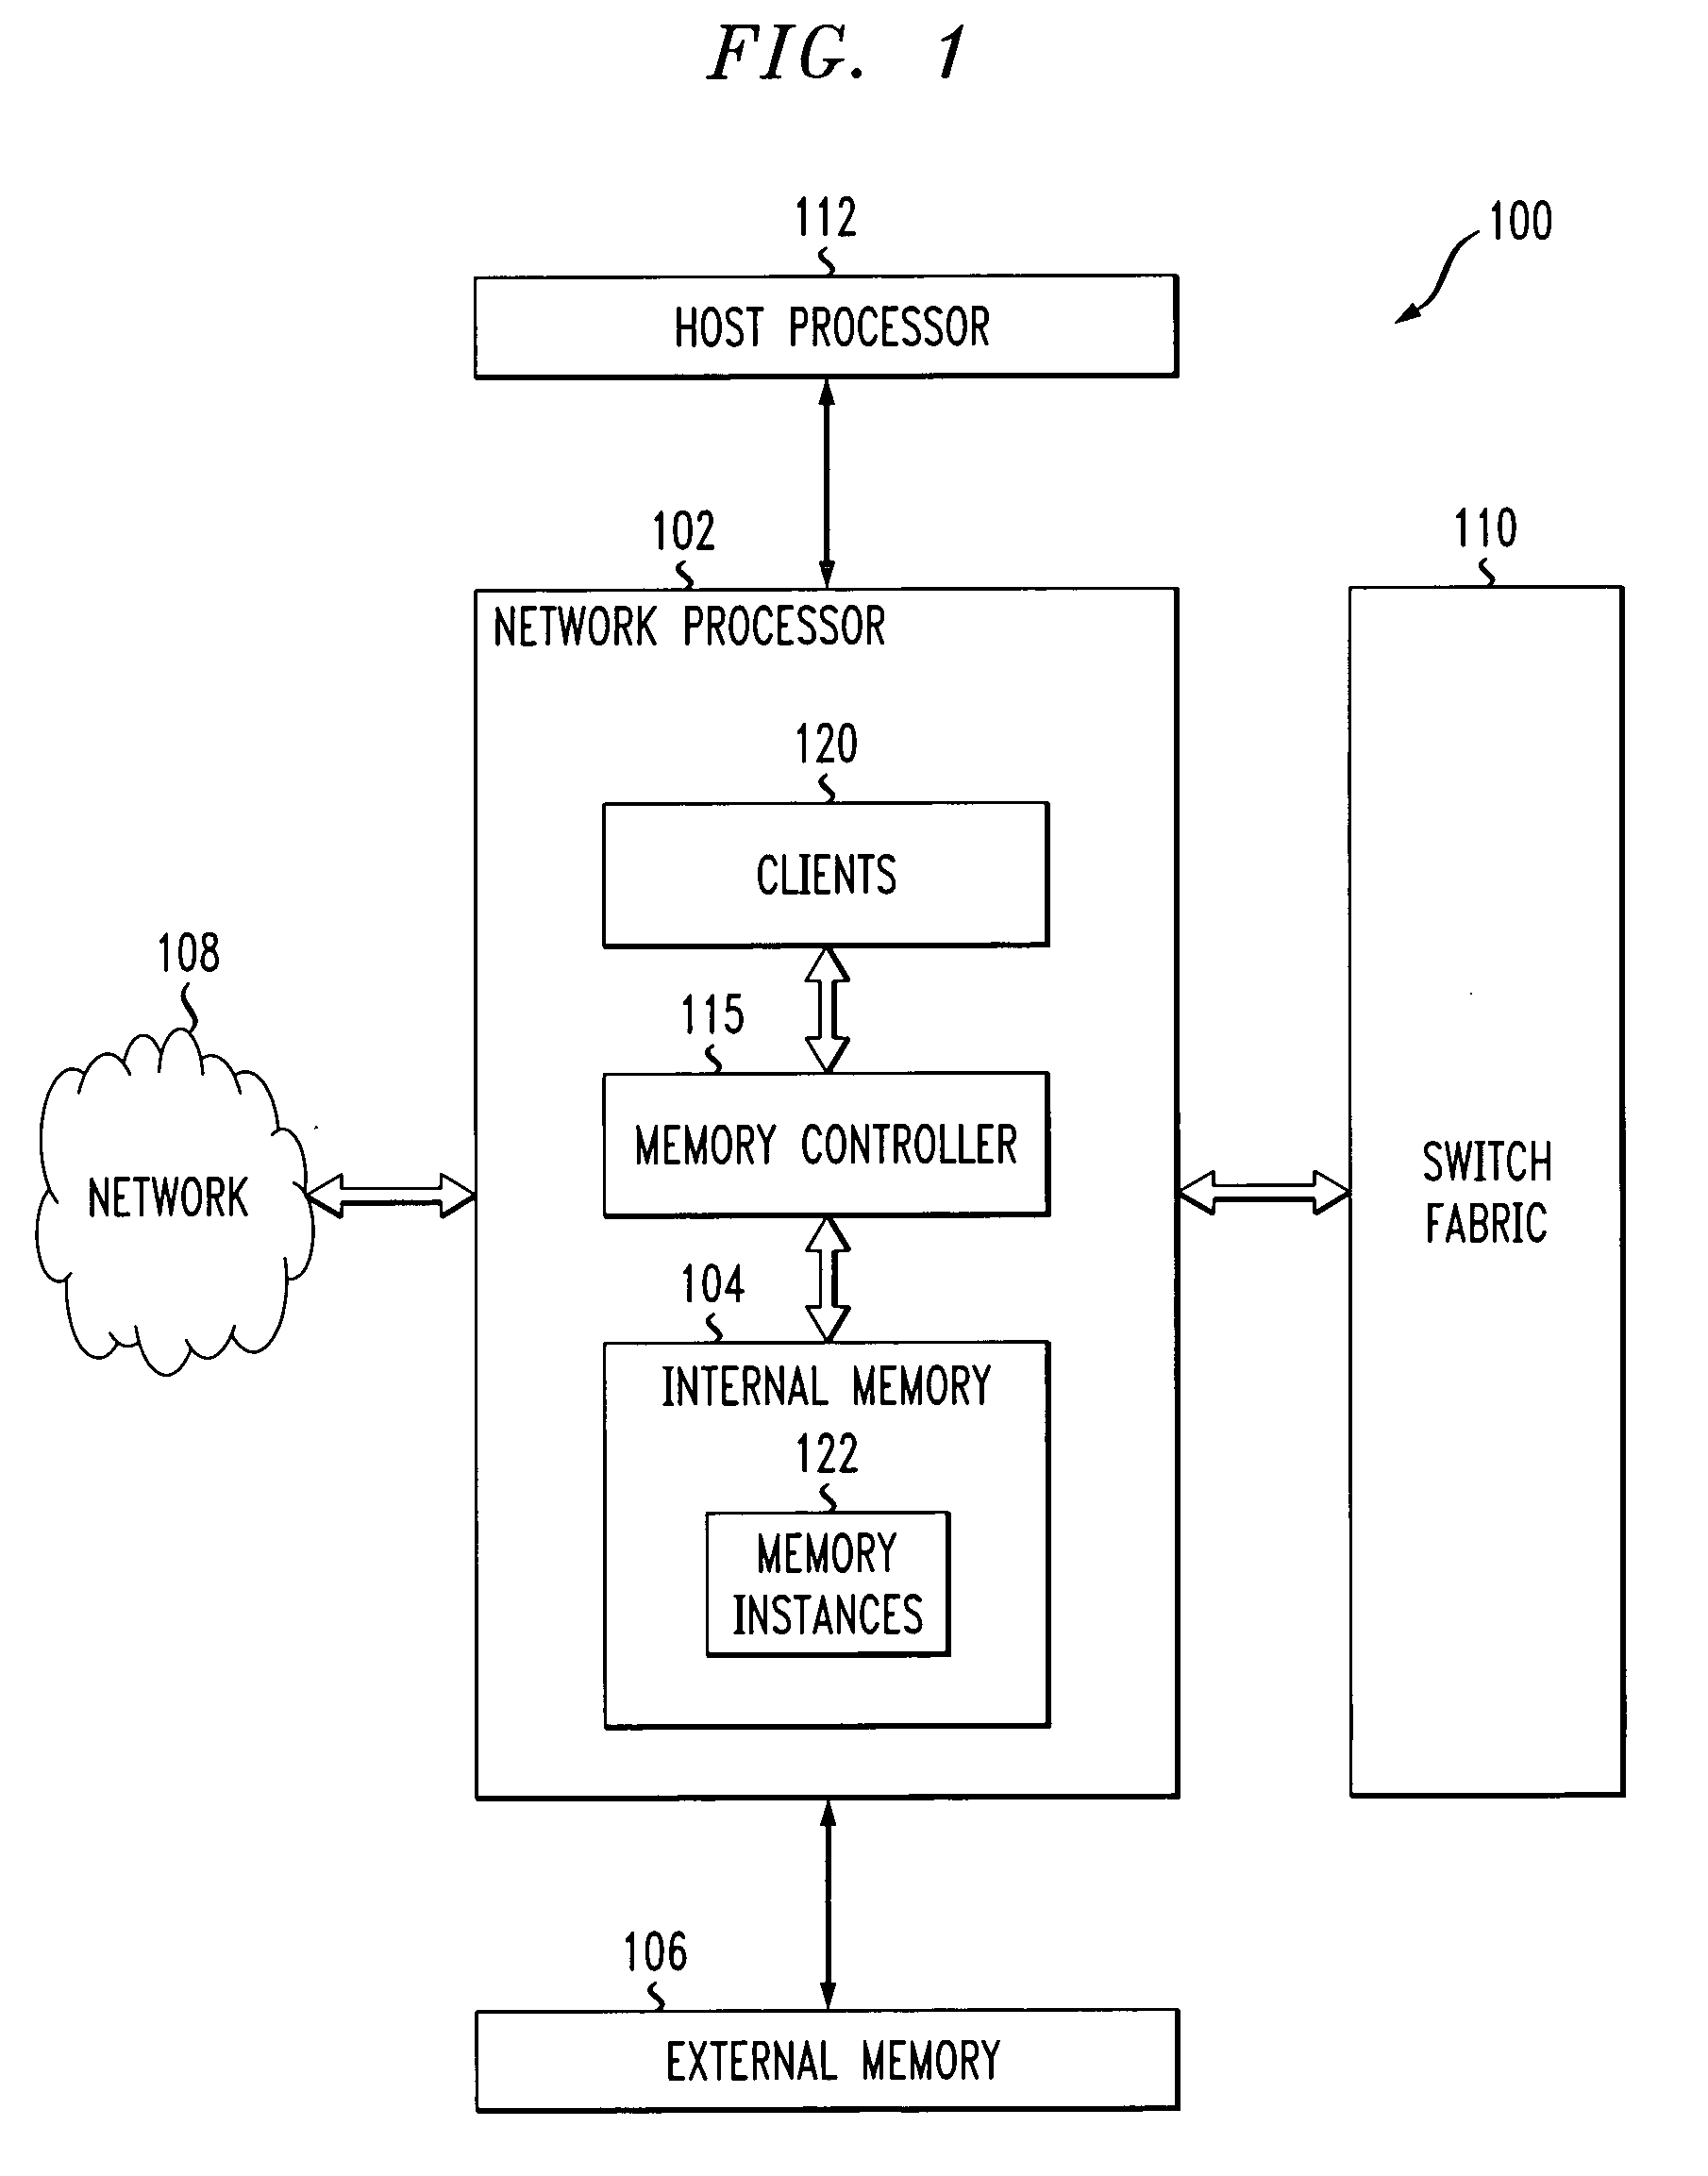 Internal memory controller providing configurable access of processor clients to memory instances